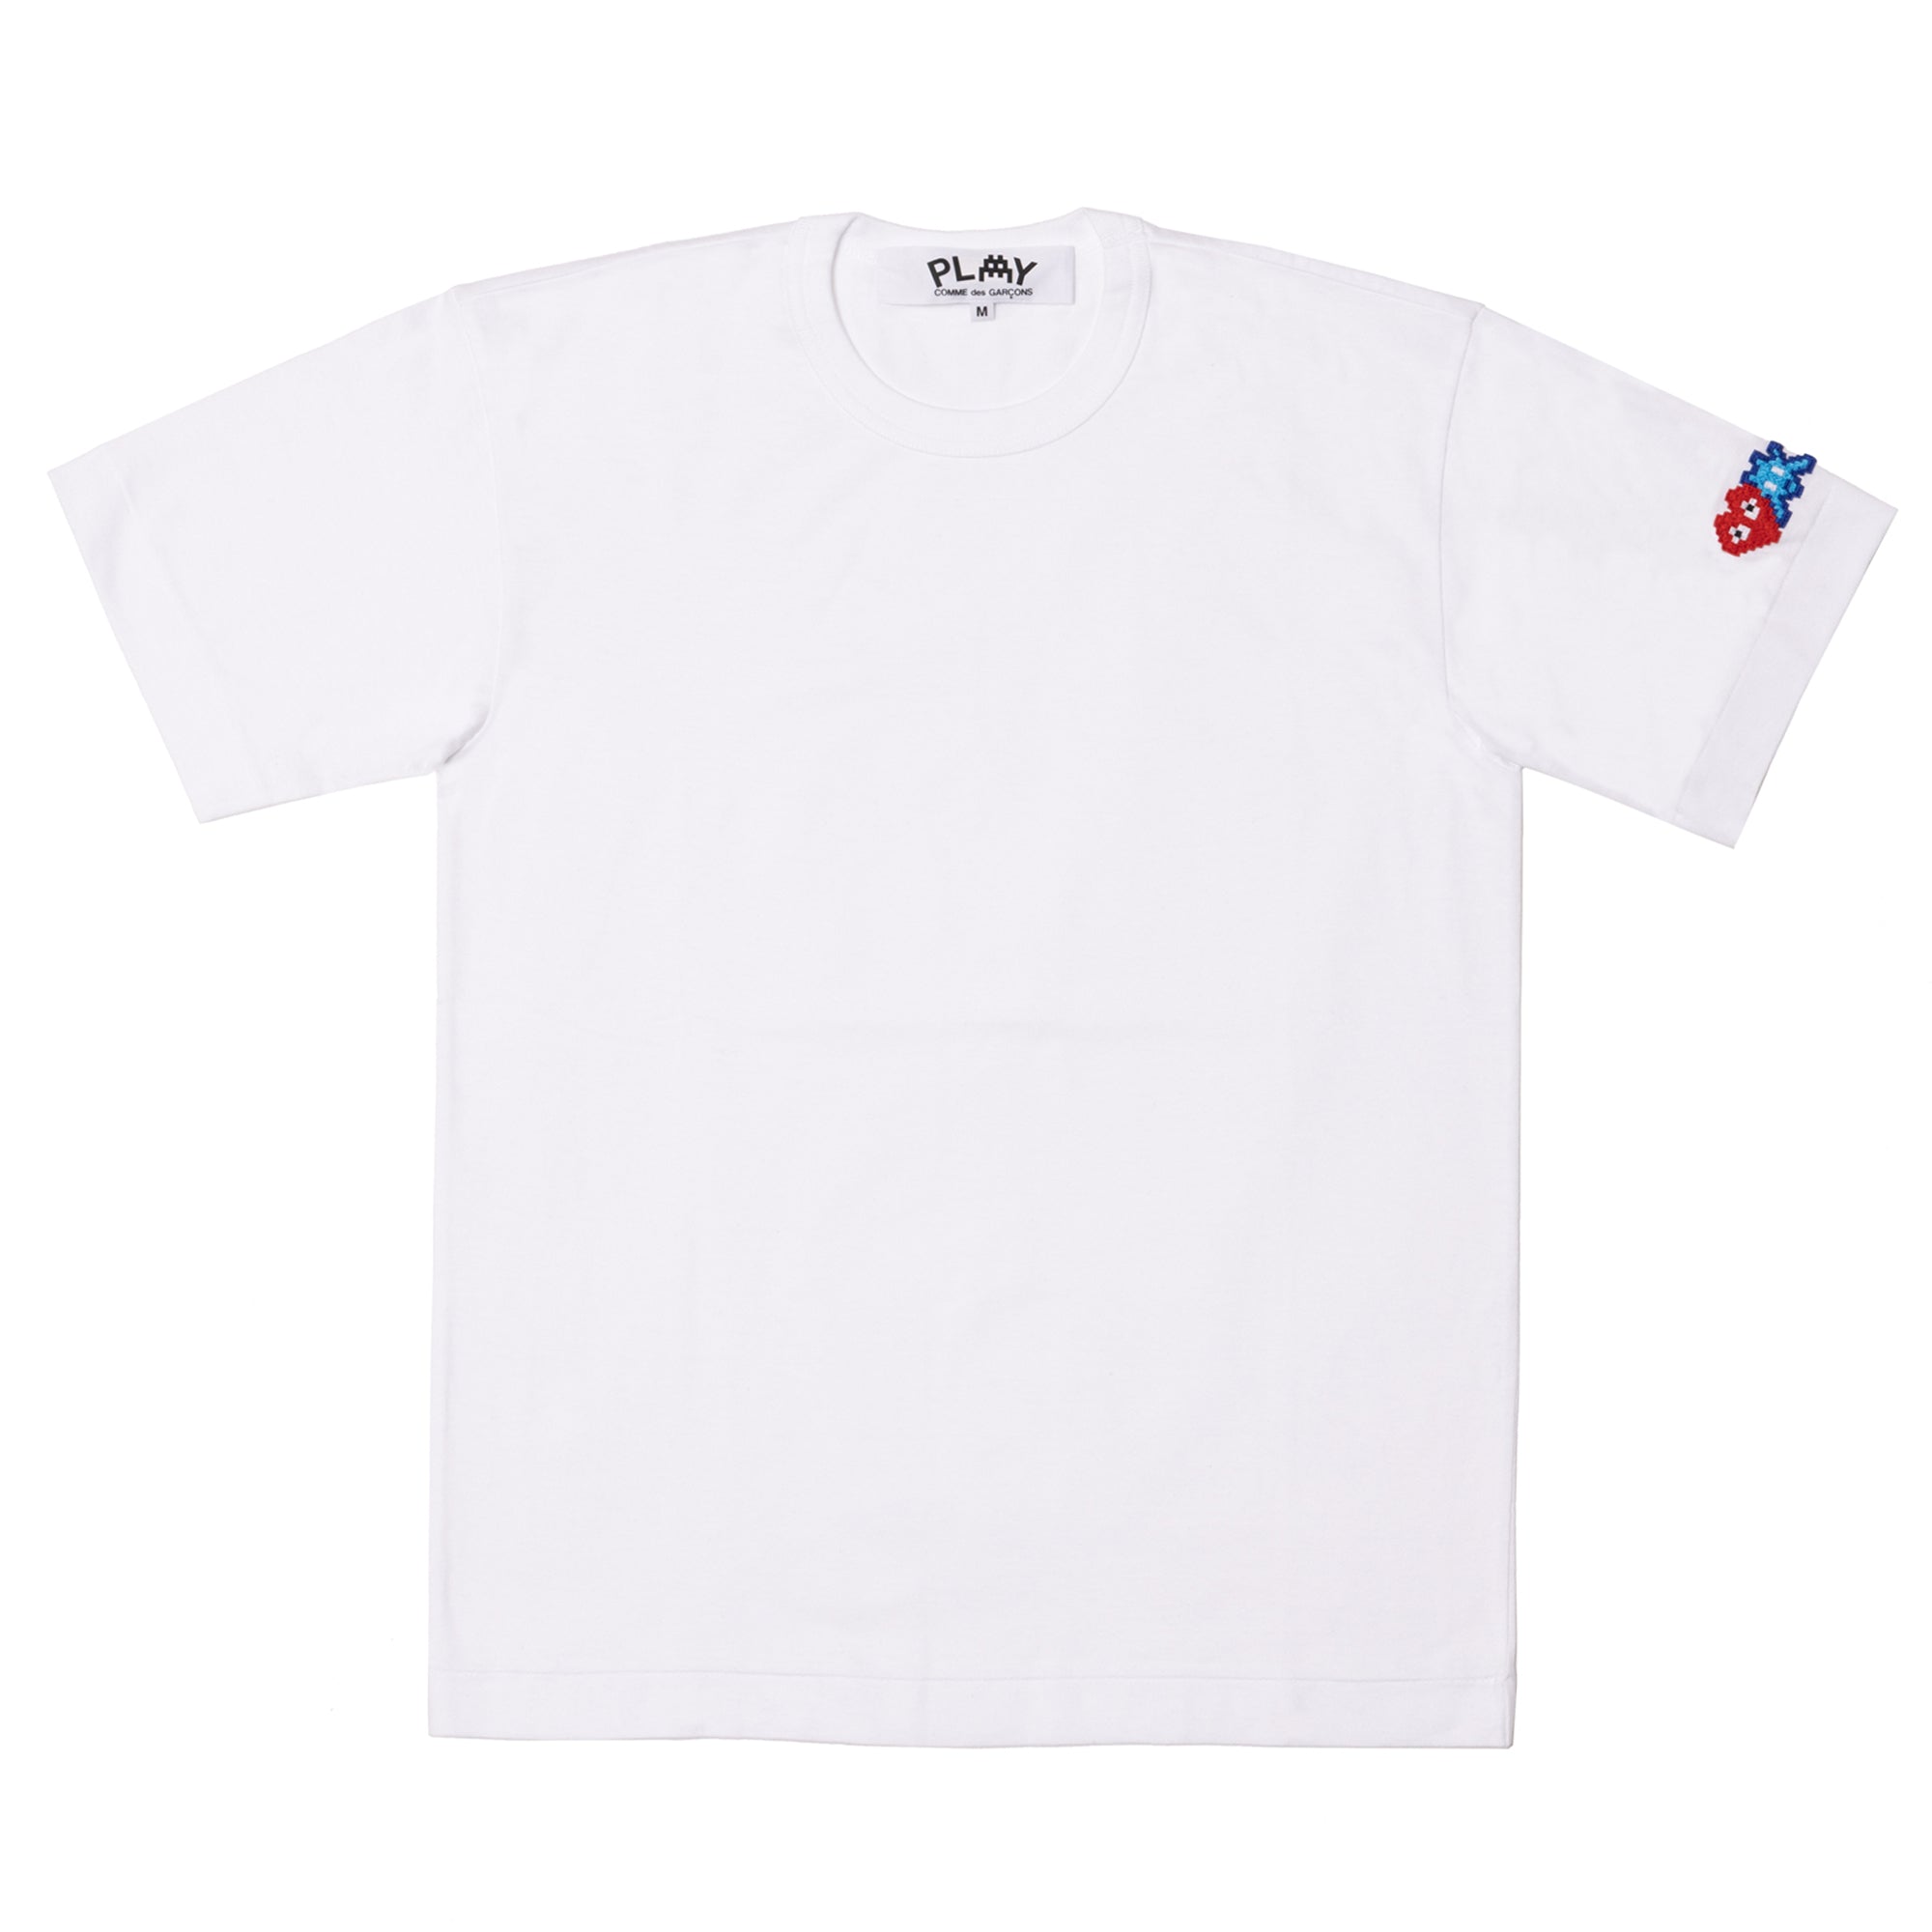 PLAY CDG - INVADER S/S T-Shirt - (White) view 1